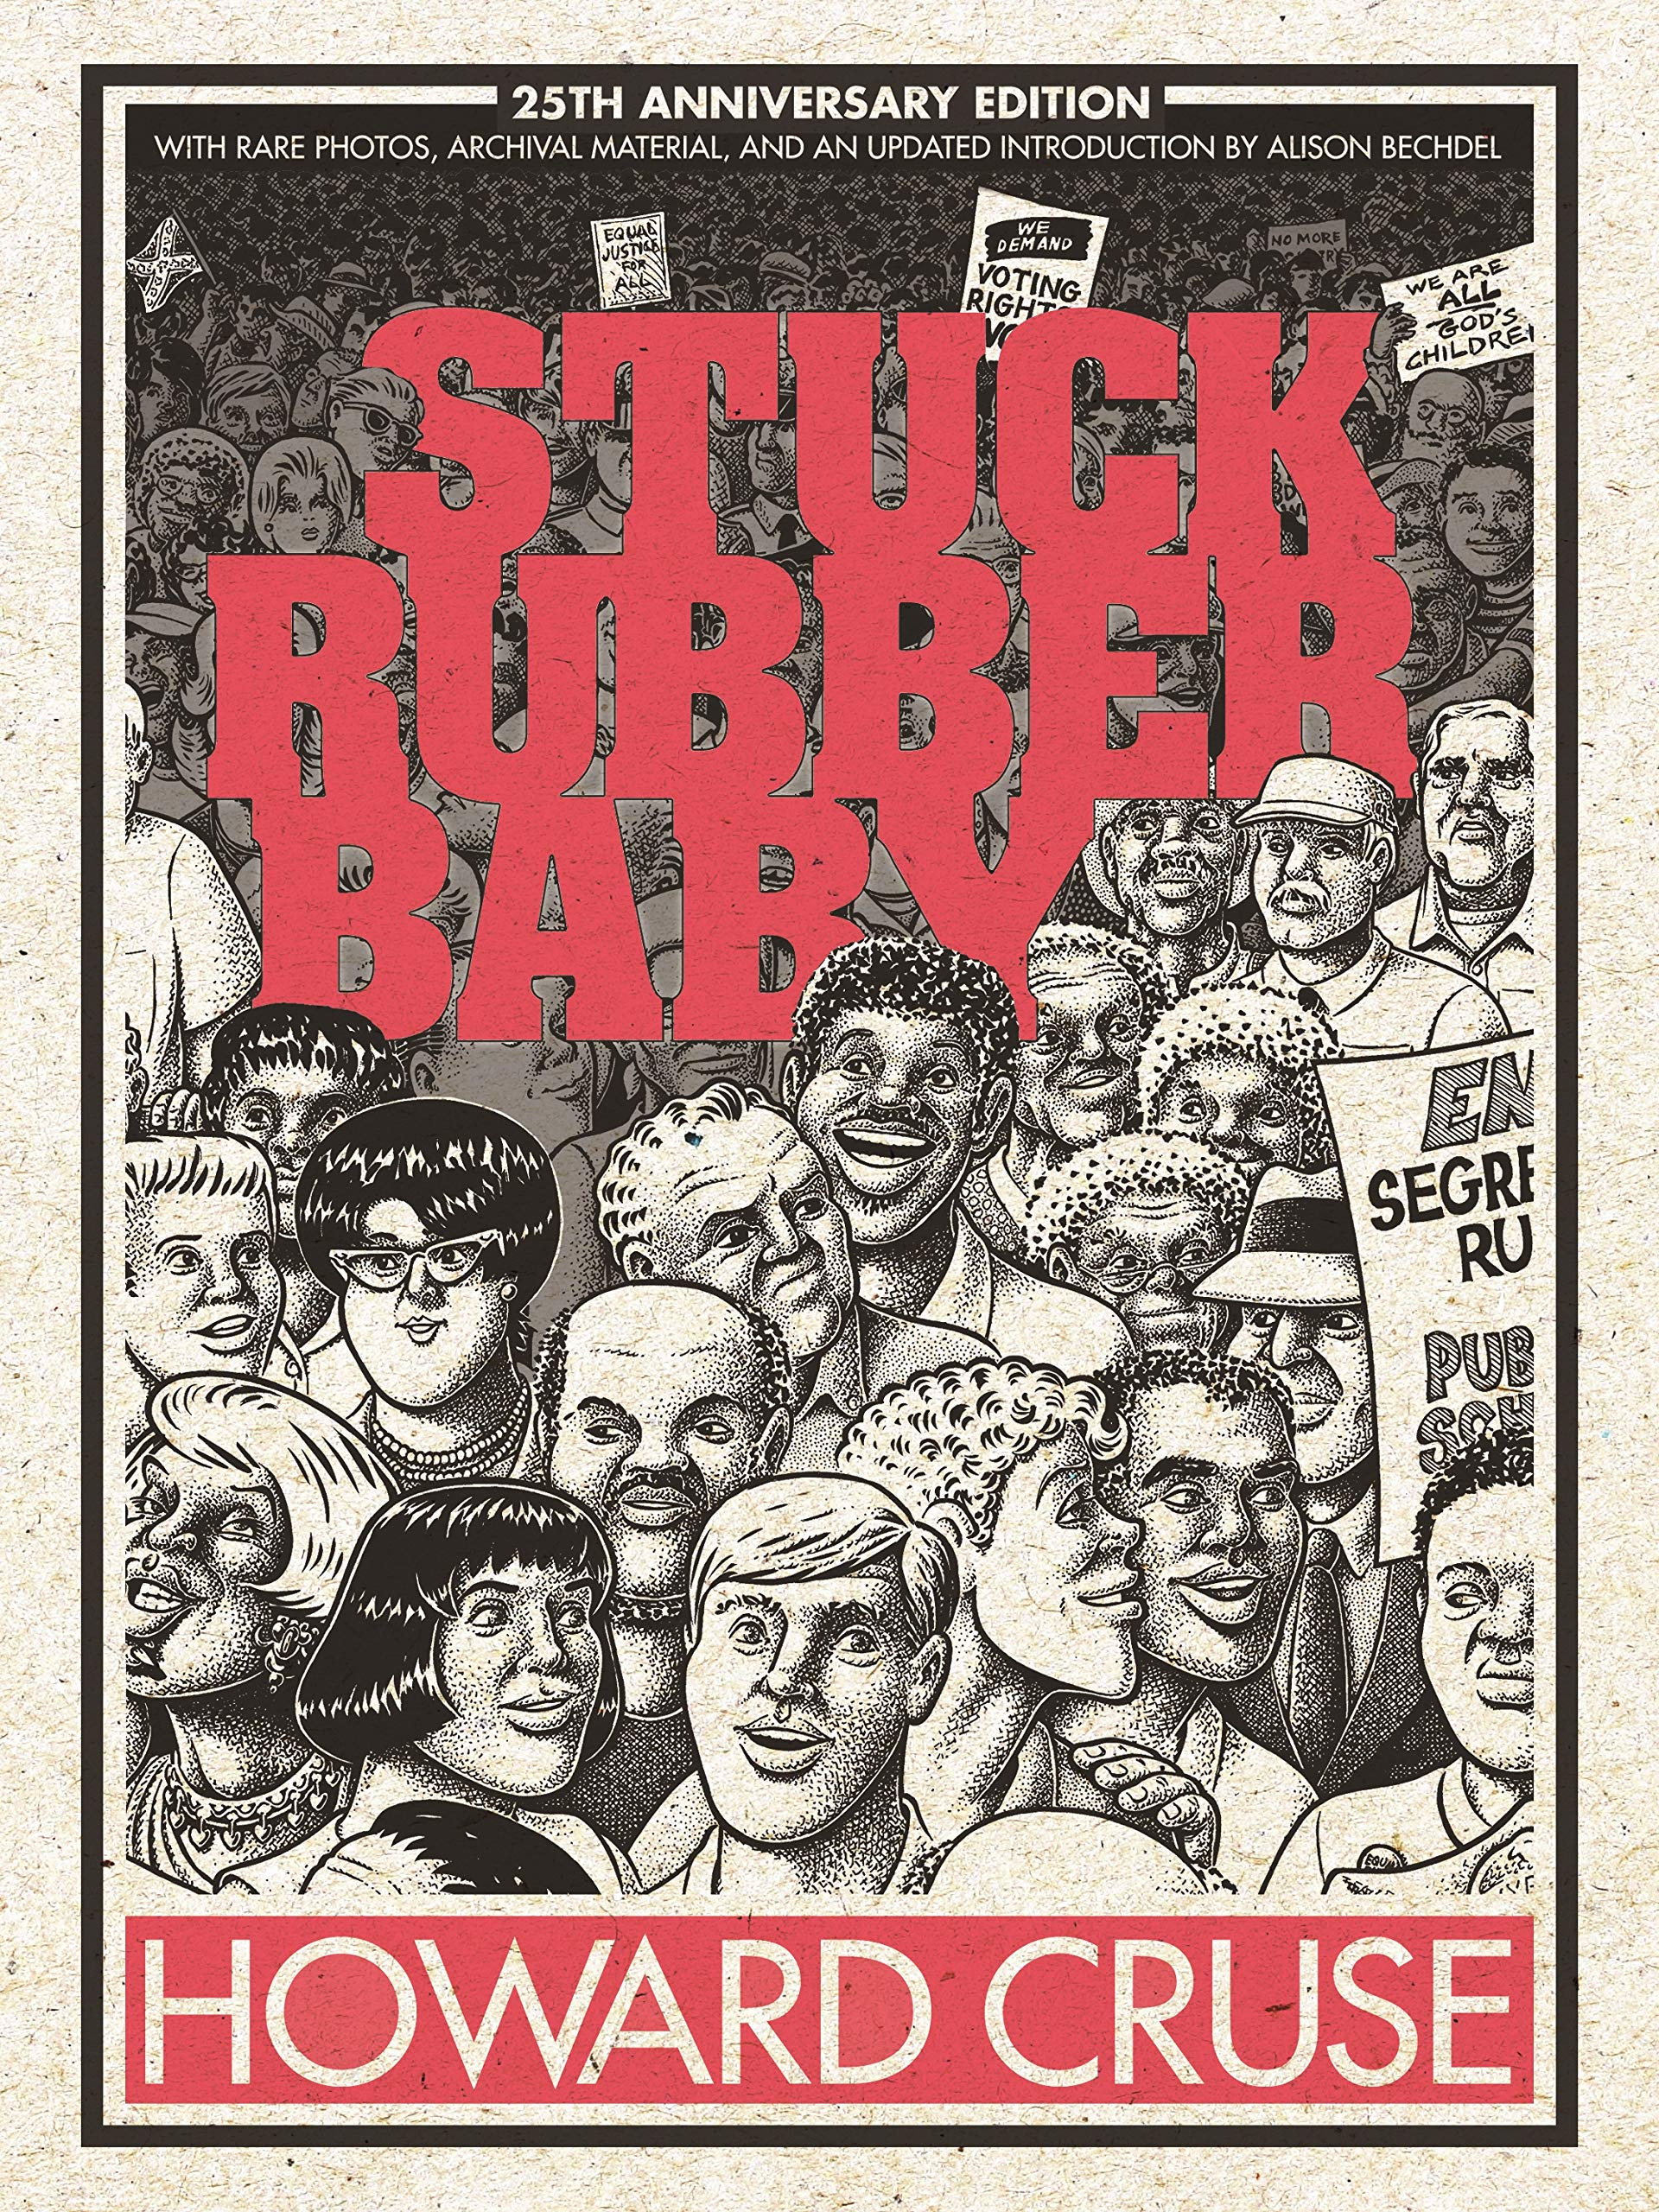 Stuck Rubber Baby - 25th Anniversary Edition